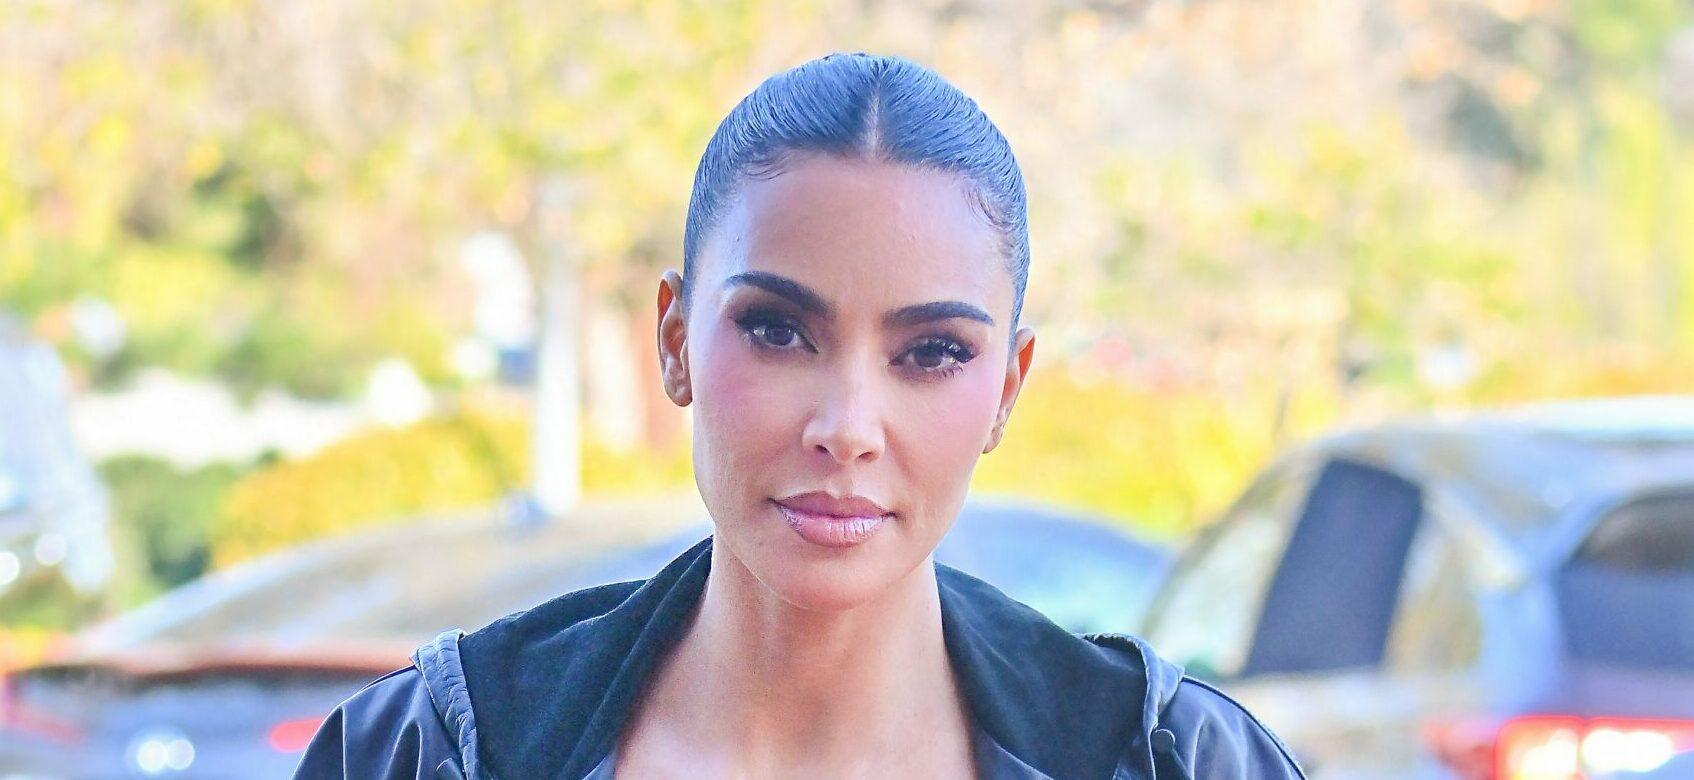 Kim Kardashian ‘Finally Made It’ To Vegas After Missing Out Last Year